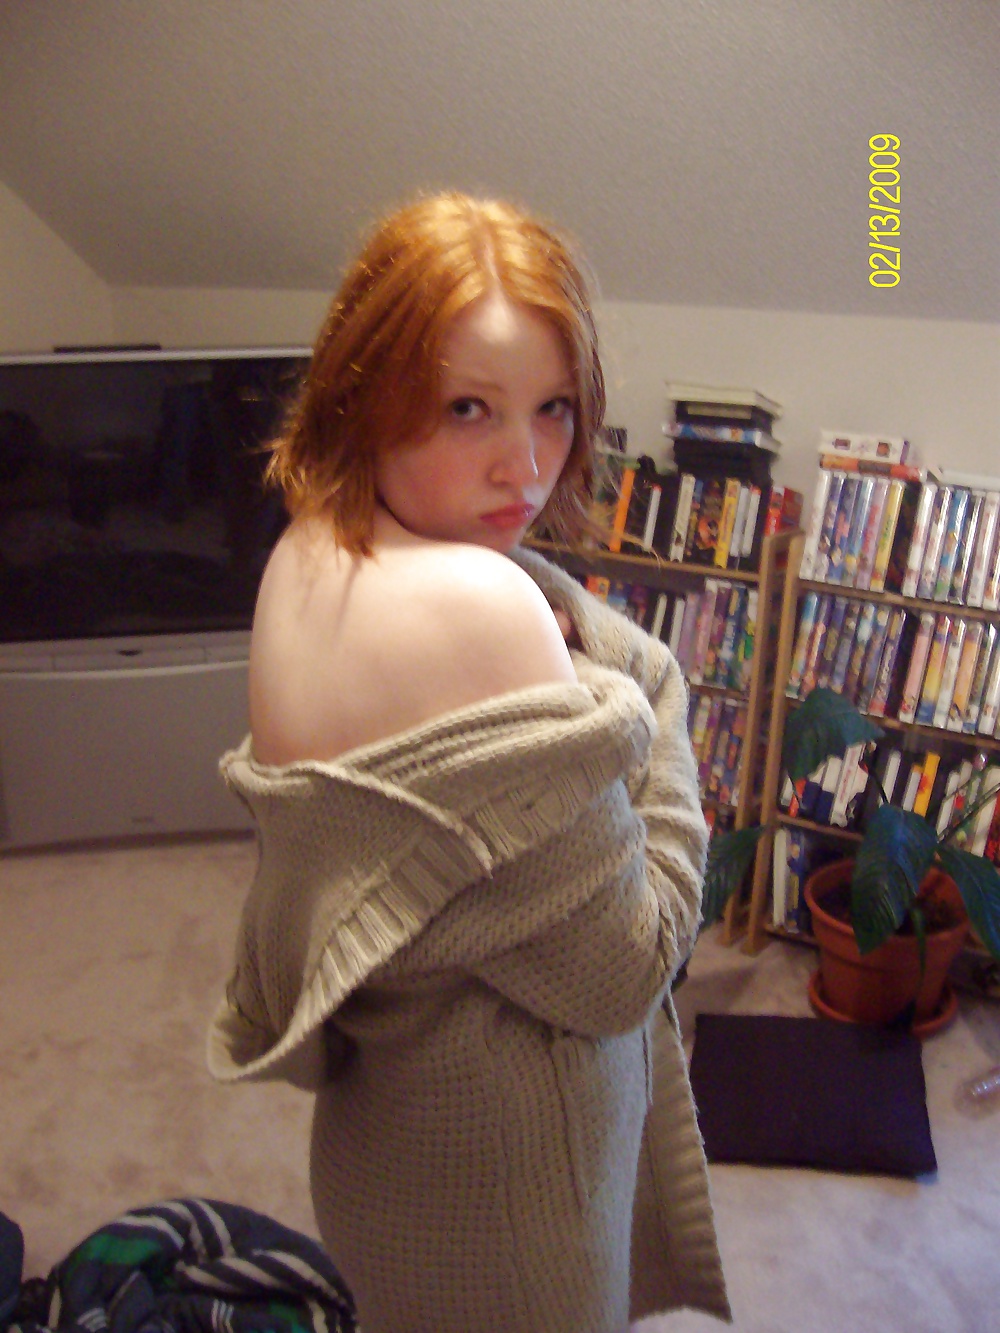 Cute Red Head Poses in her Messy Apartment  #33415898